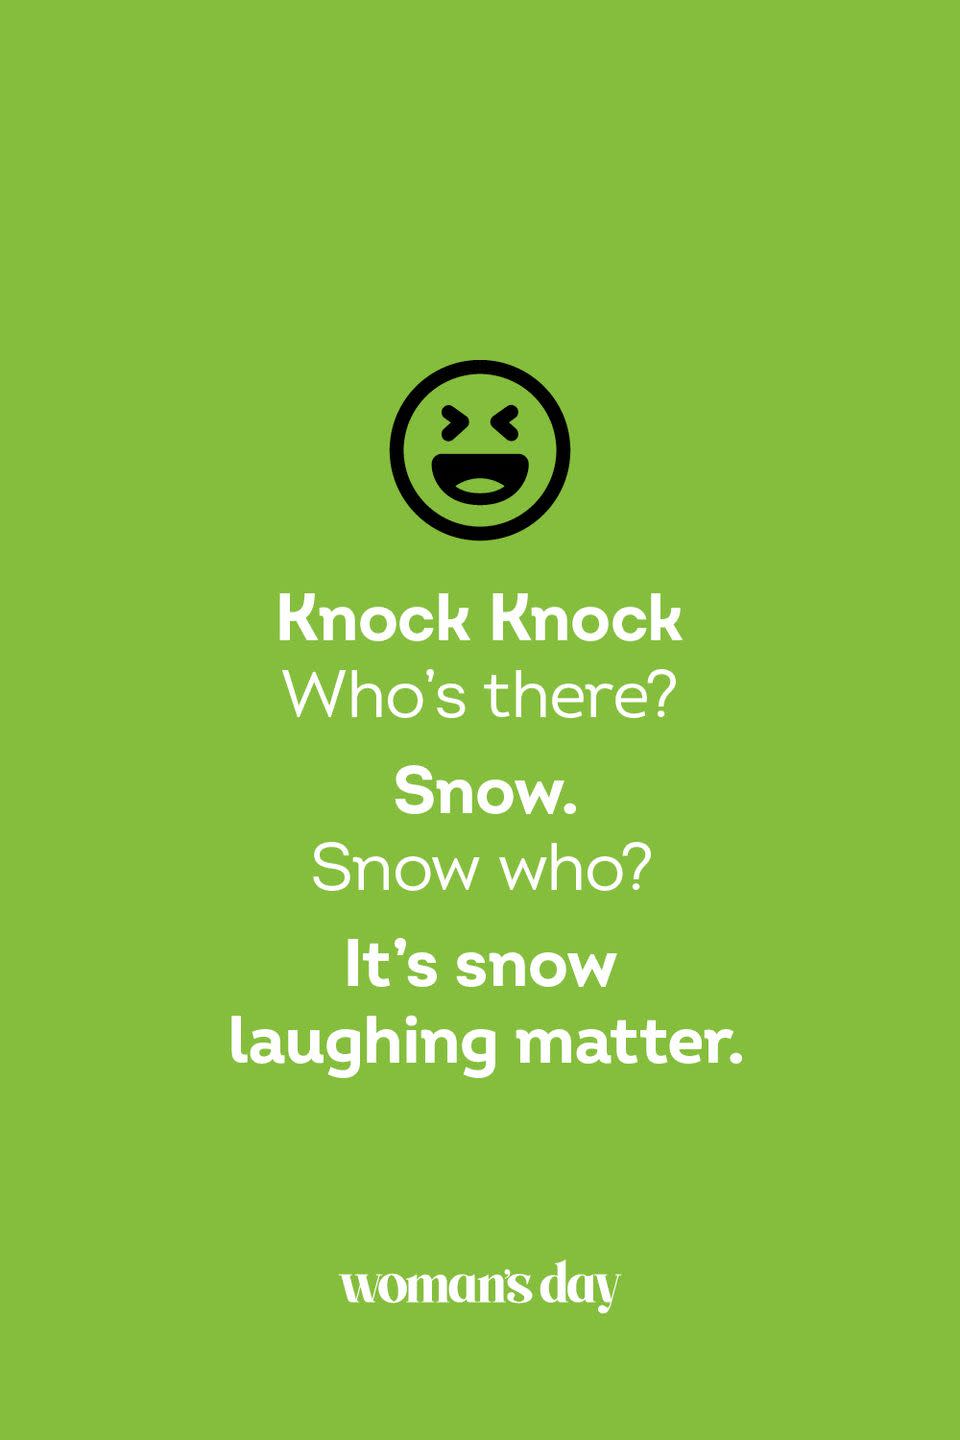 <p><strong>Knock Knock</strong></p><p><em>Who’s there? </em></p><p><strong>Snow.</strong></p><p><em>Snow who?</em></p><p><strong>It’s snow laughing matter.</strong></p>